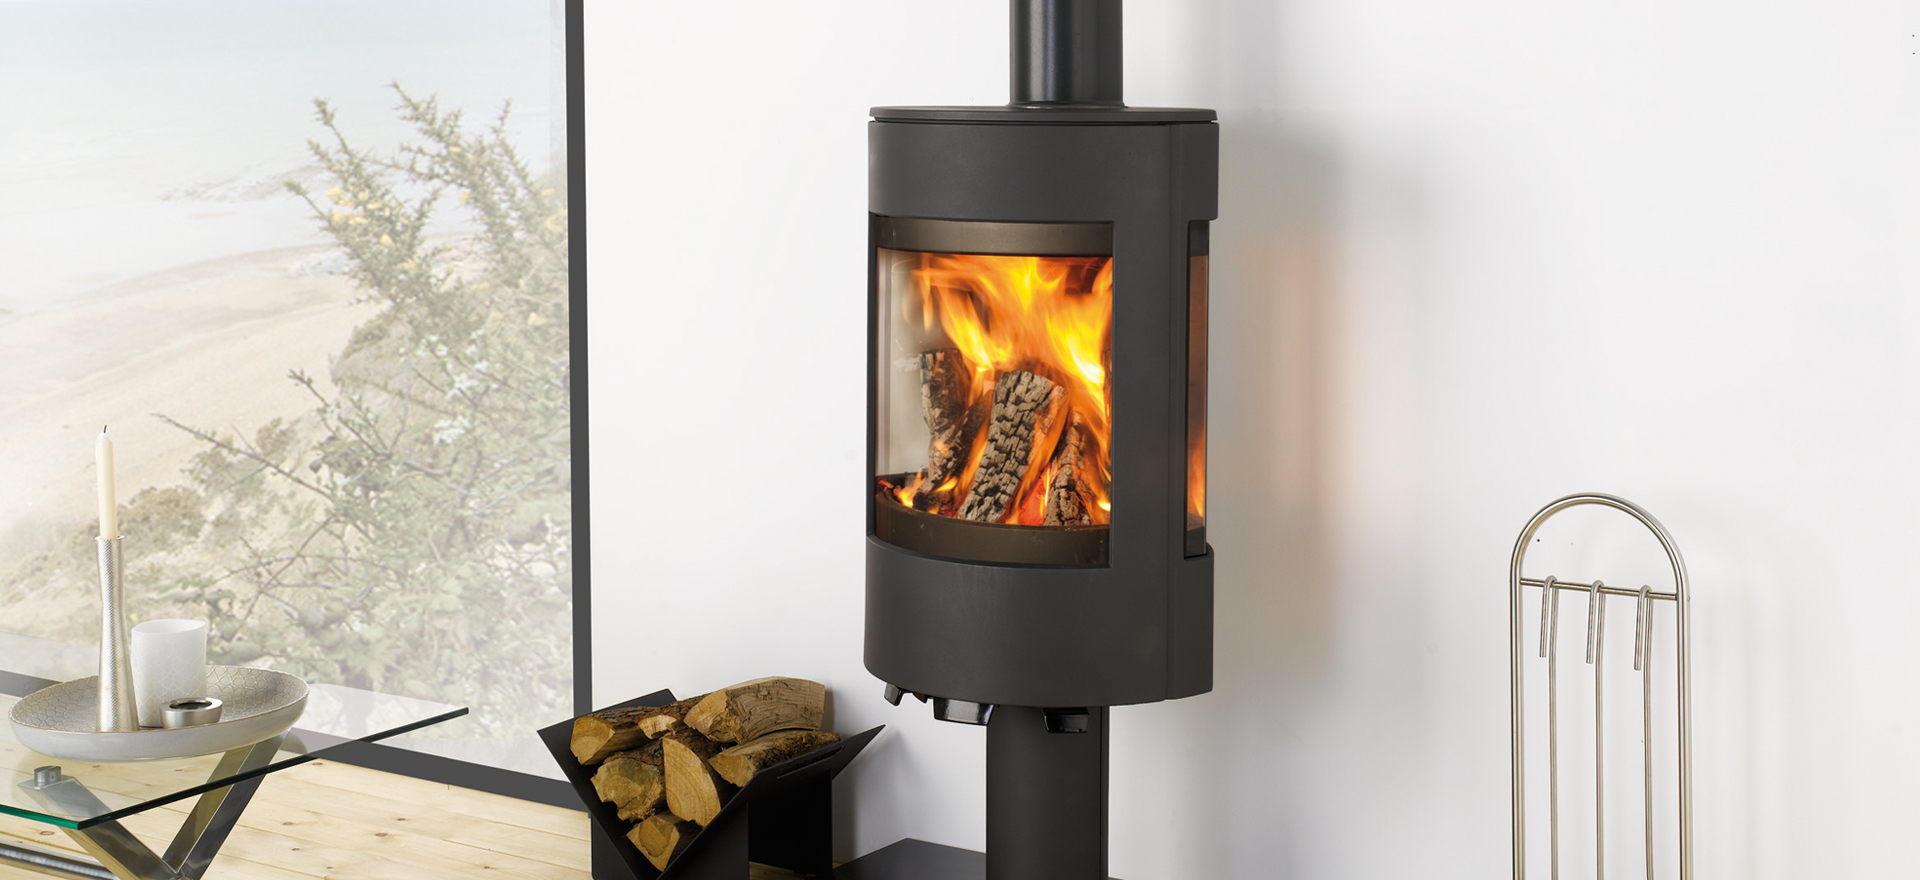 A contemporary wood burner with a Scandinavian twist - Dovre Stoves